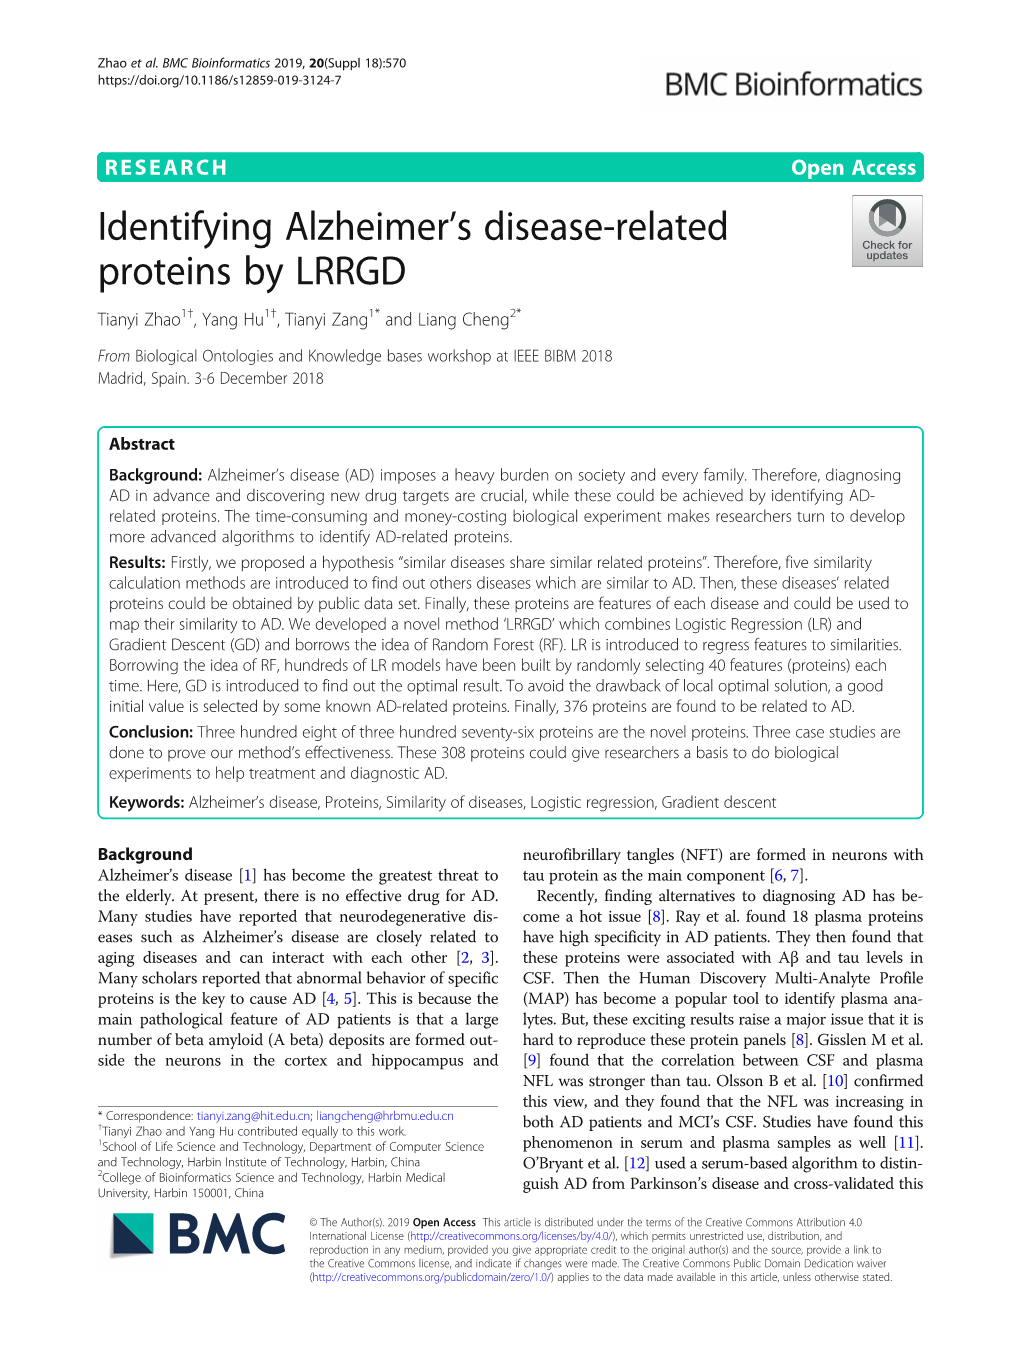 Identifying Alzheimer's Disease-Related Proteins by LRRGD